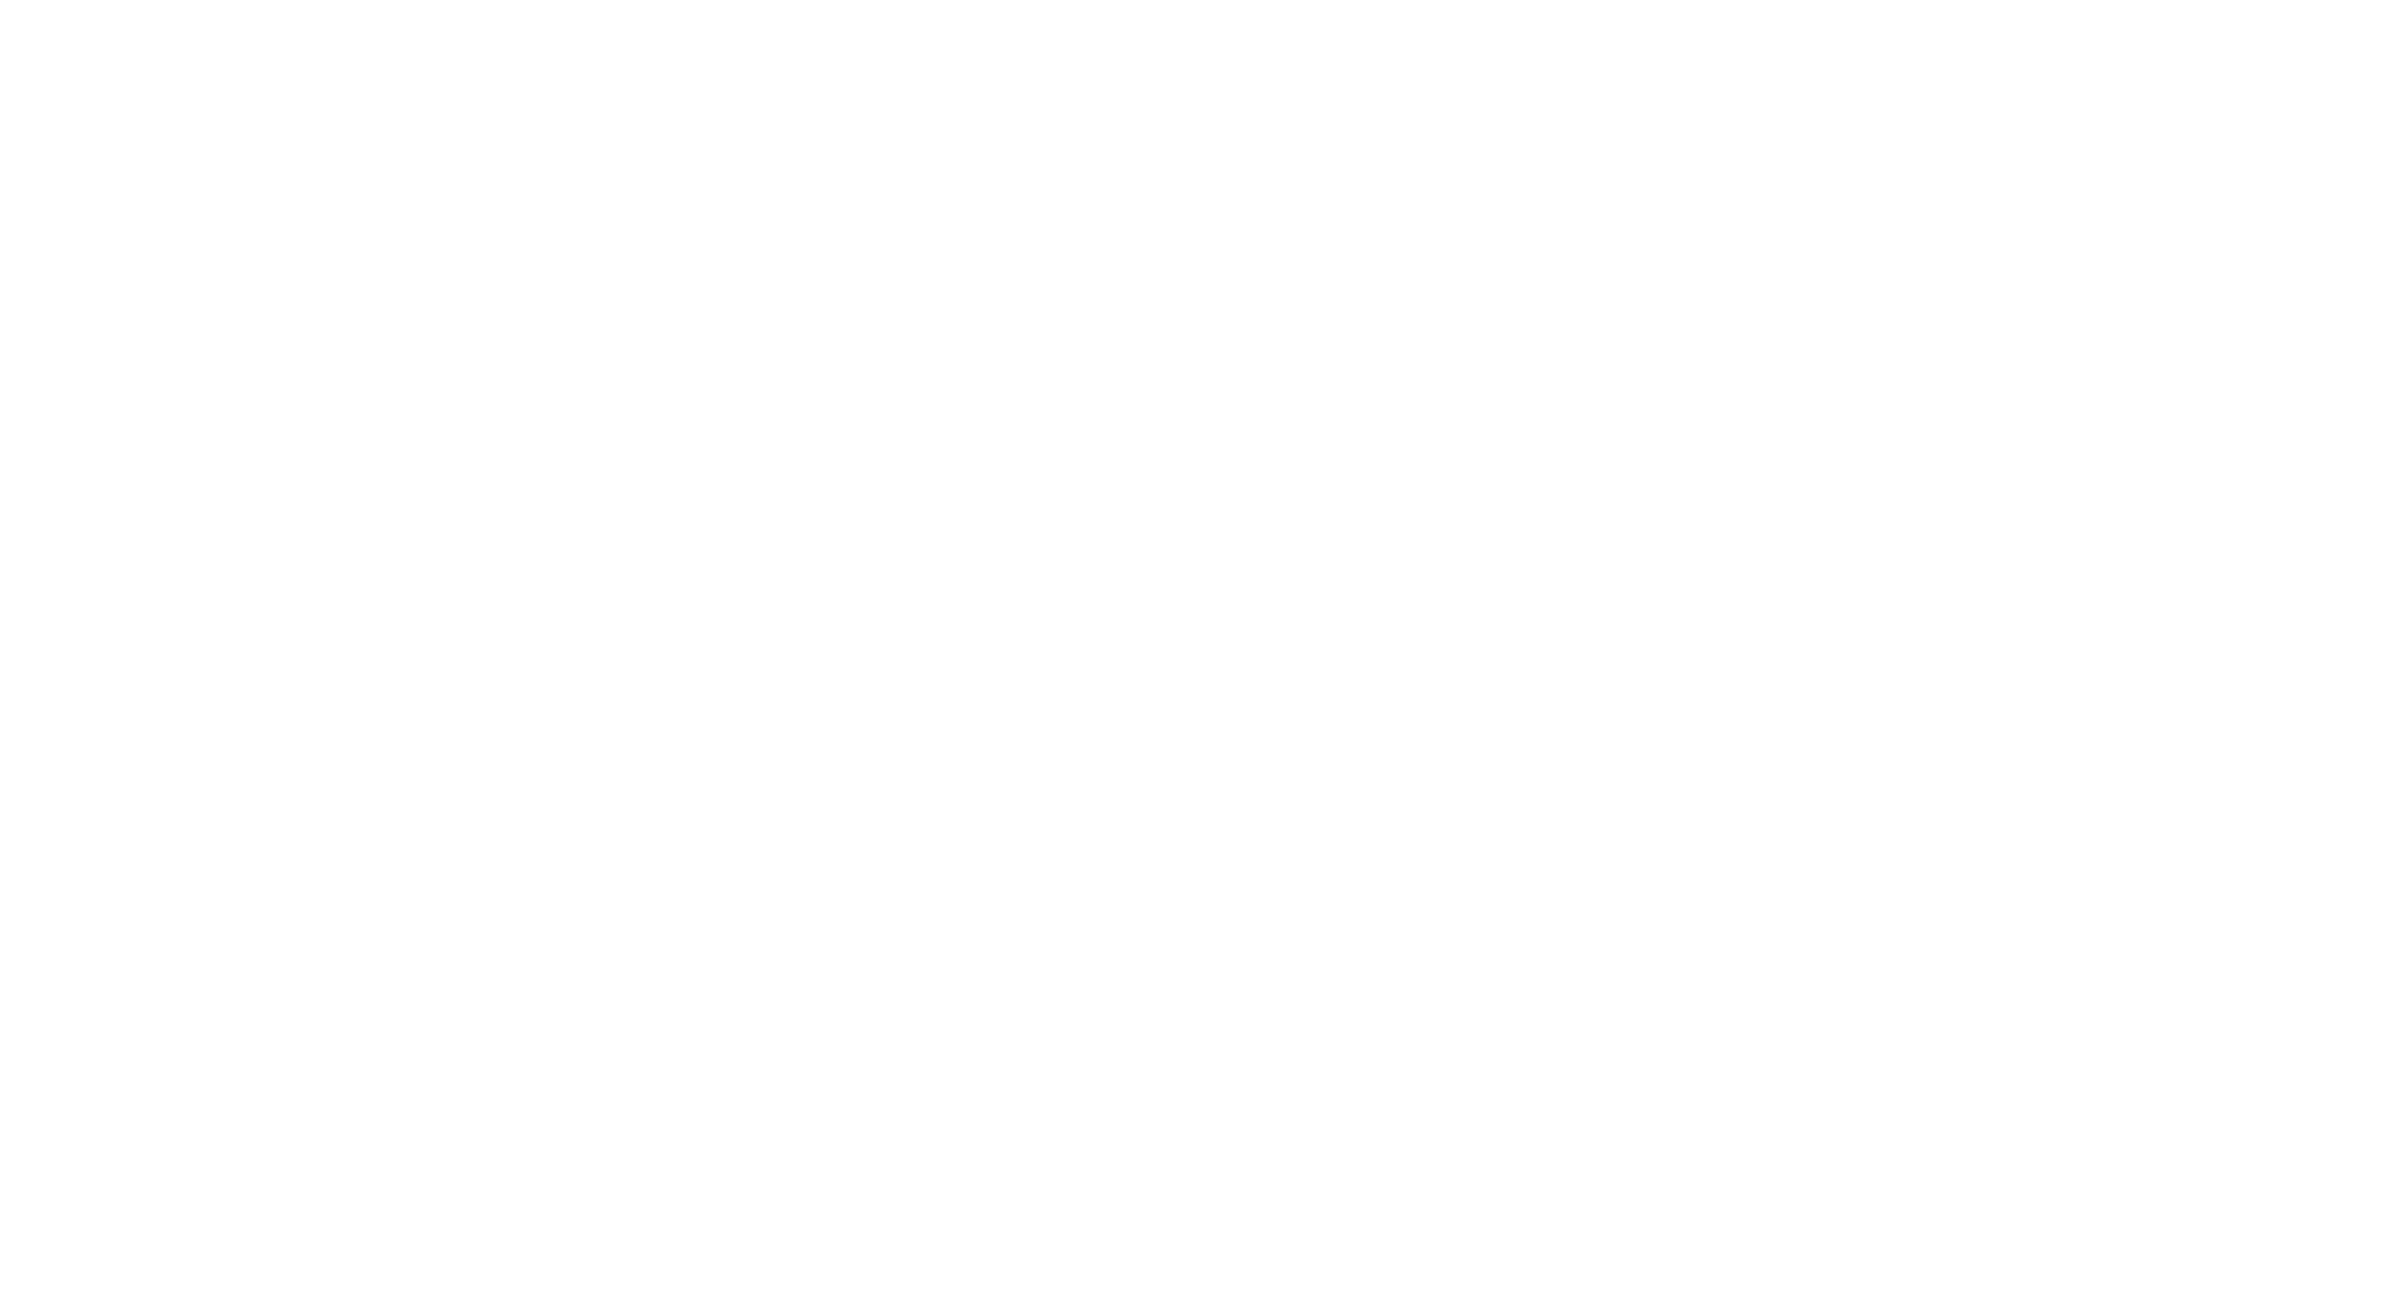 The Information Standard